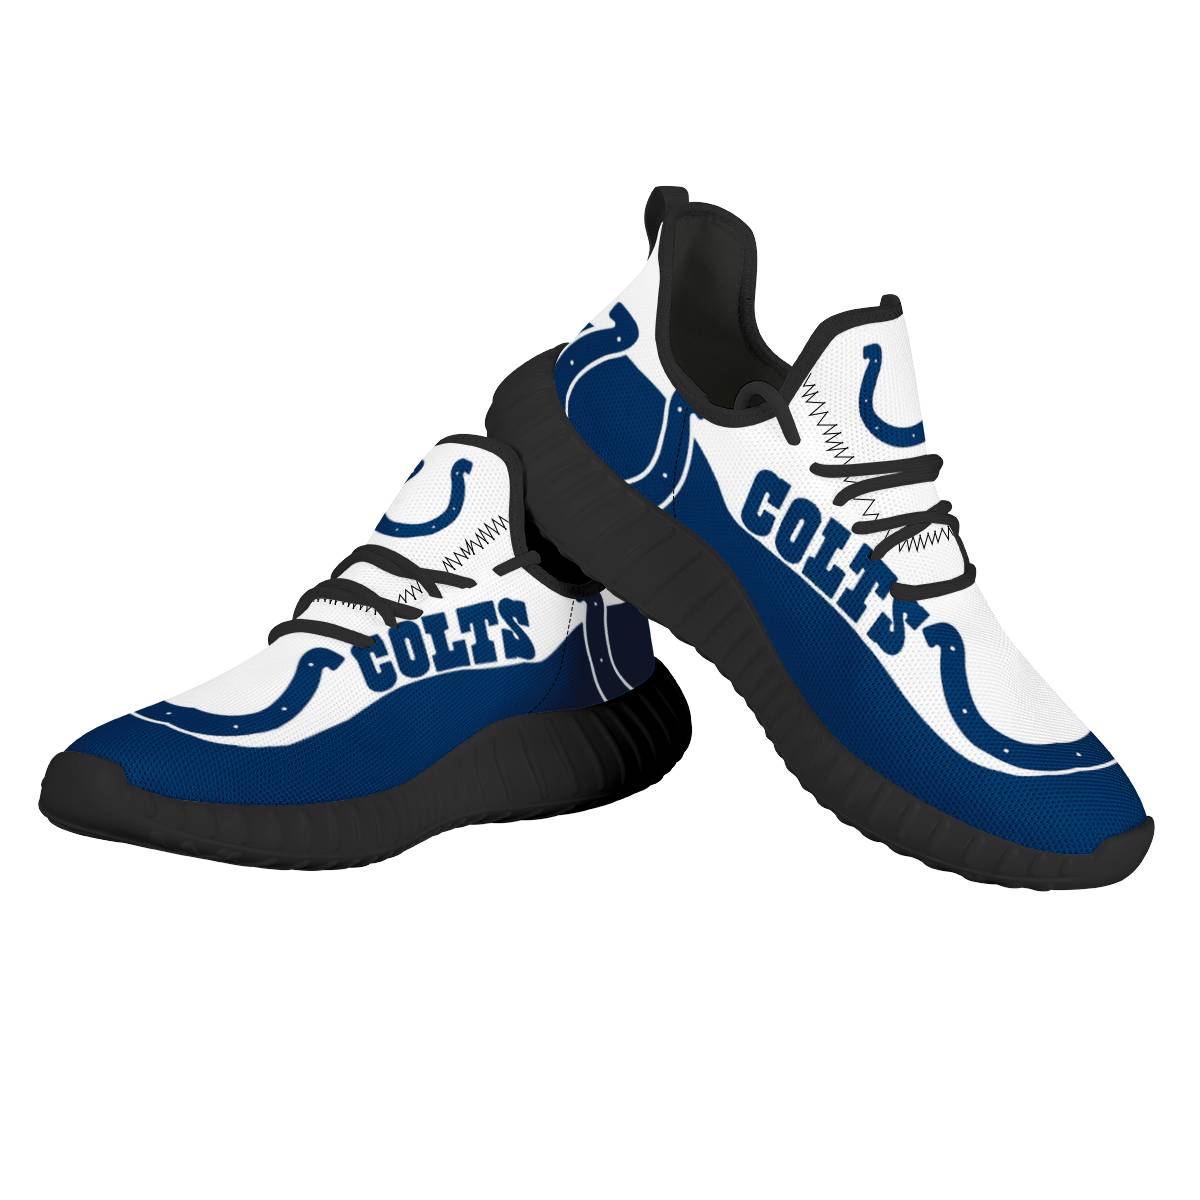 Women's Indianapolis Colts Mesh Knit Sneakers/Shoes 008